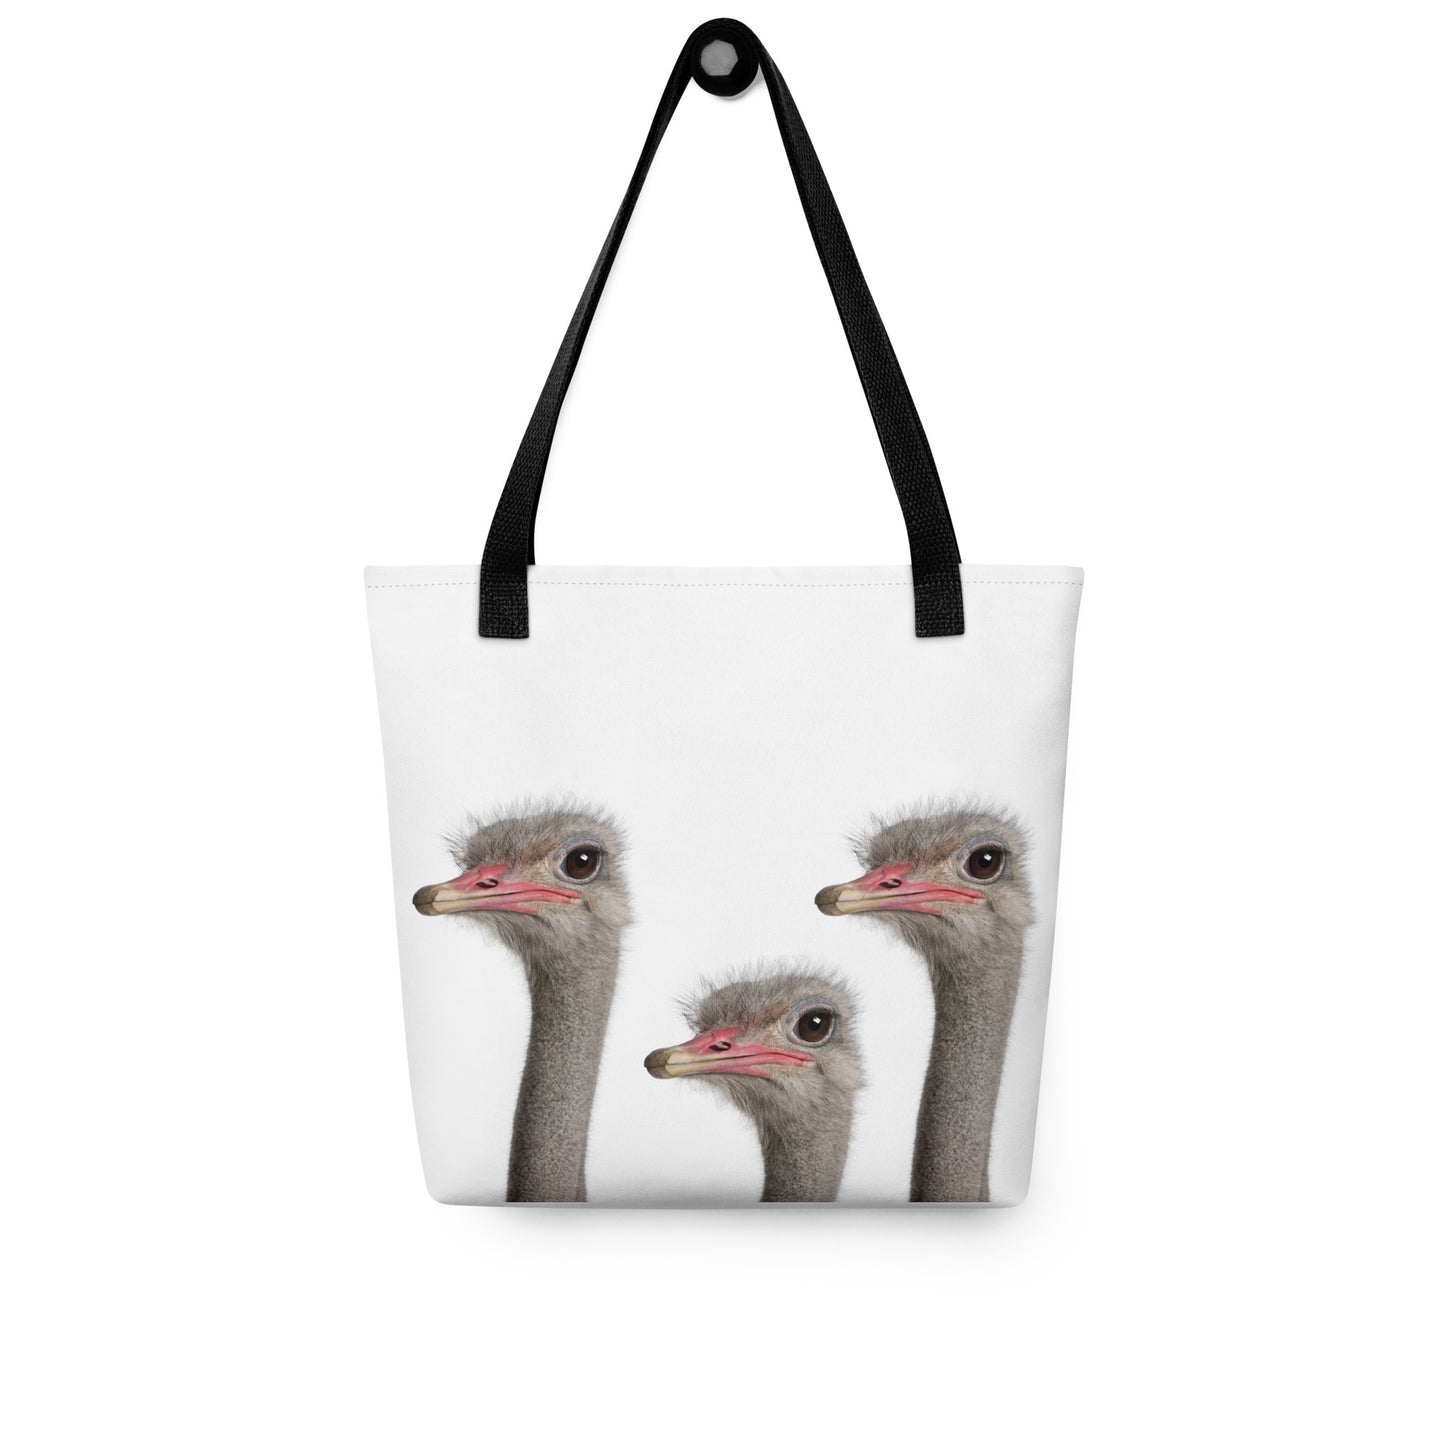 Tote bag printed with ostrich